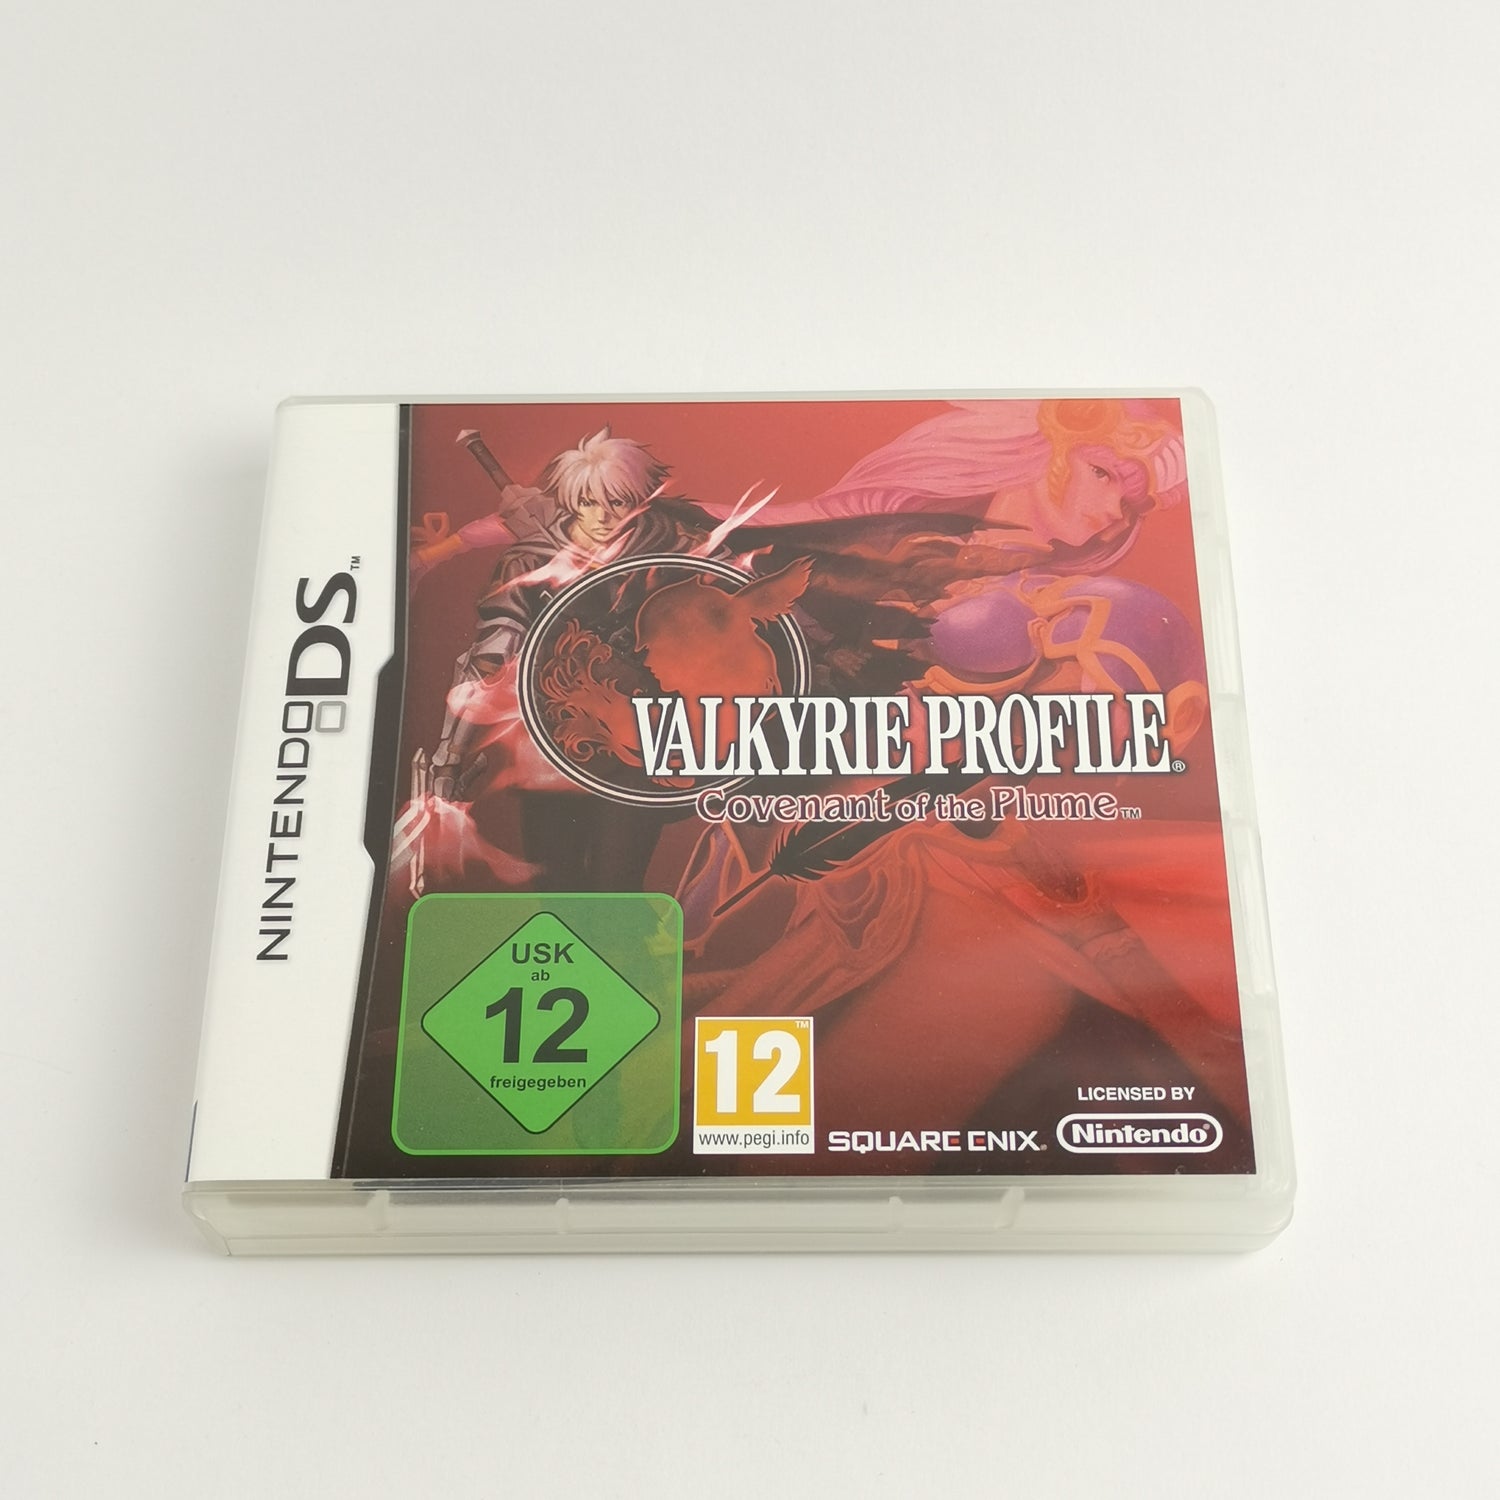 Nintendo DS Spiel : Valkyrie Profile Covenant of the Plume + Bradygames Guide